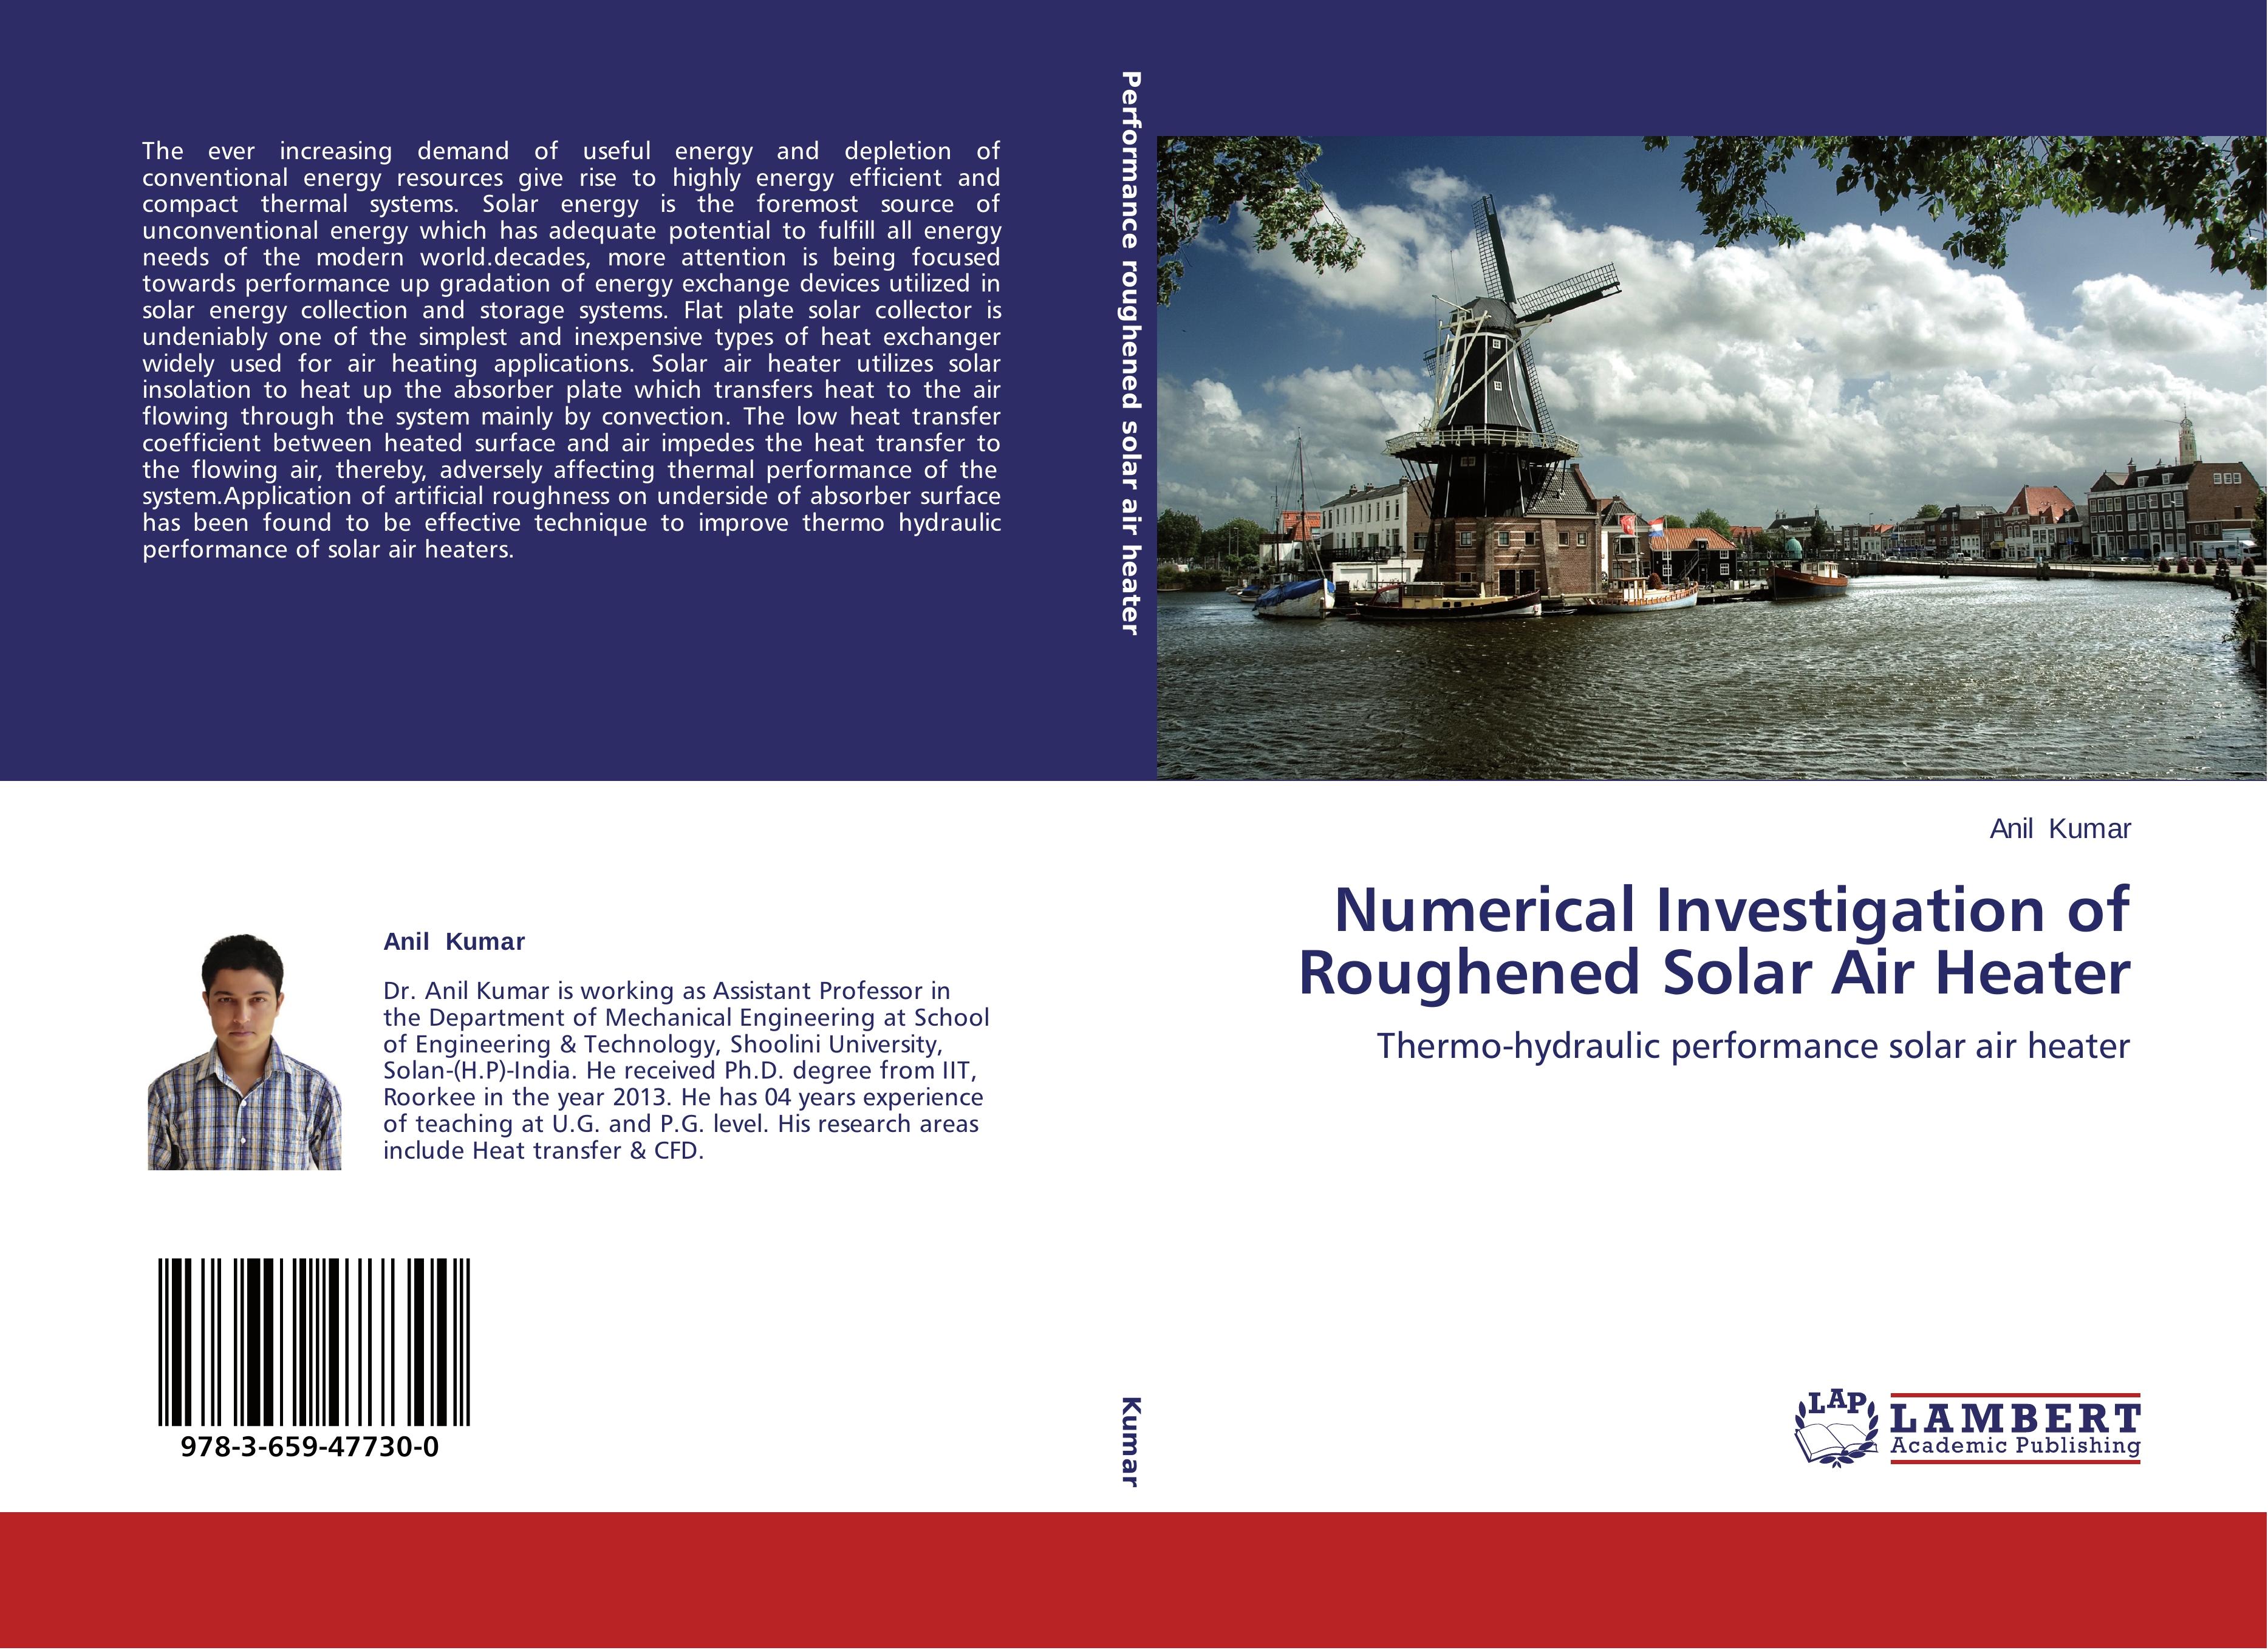 Numerical Investigation of Roughened Solar Air Heater - ANIL KUMAR